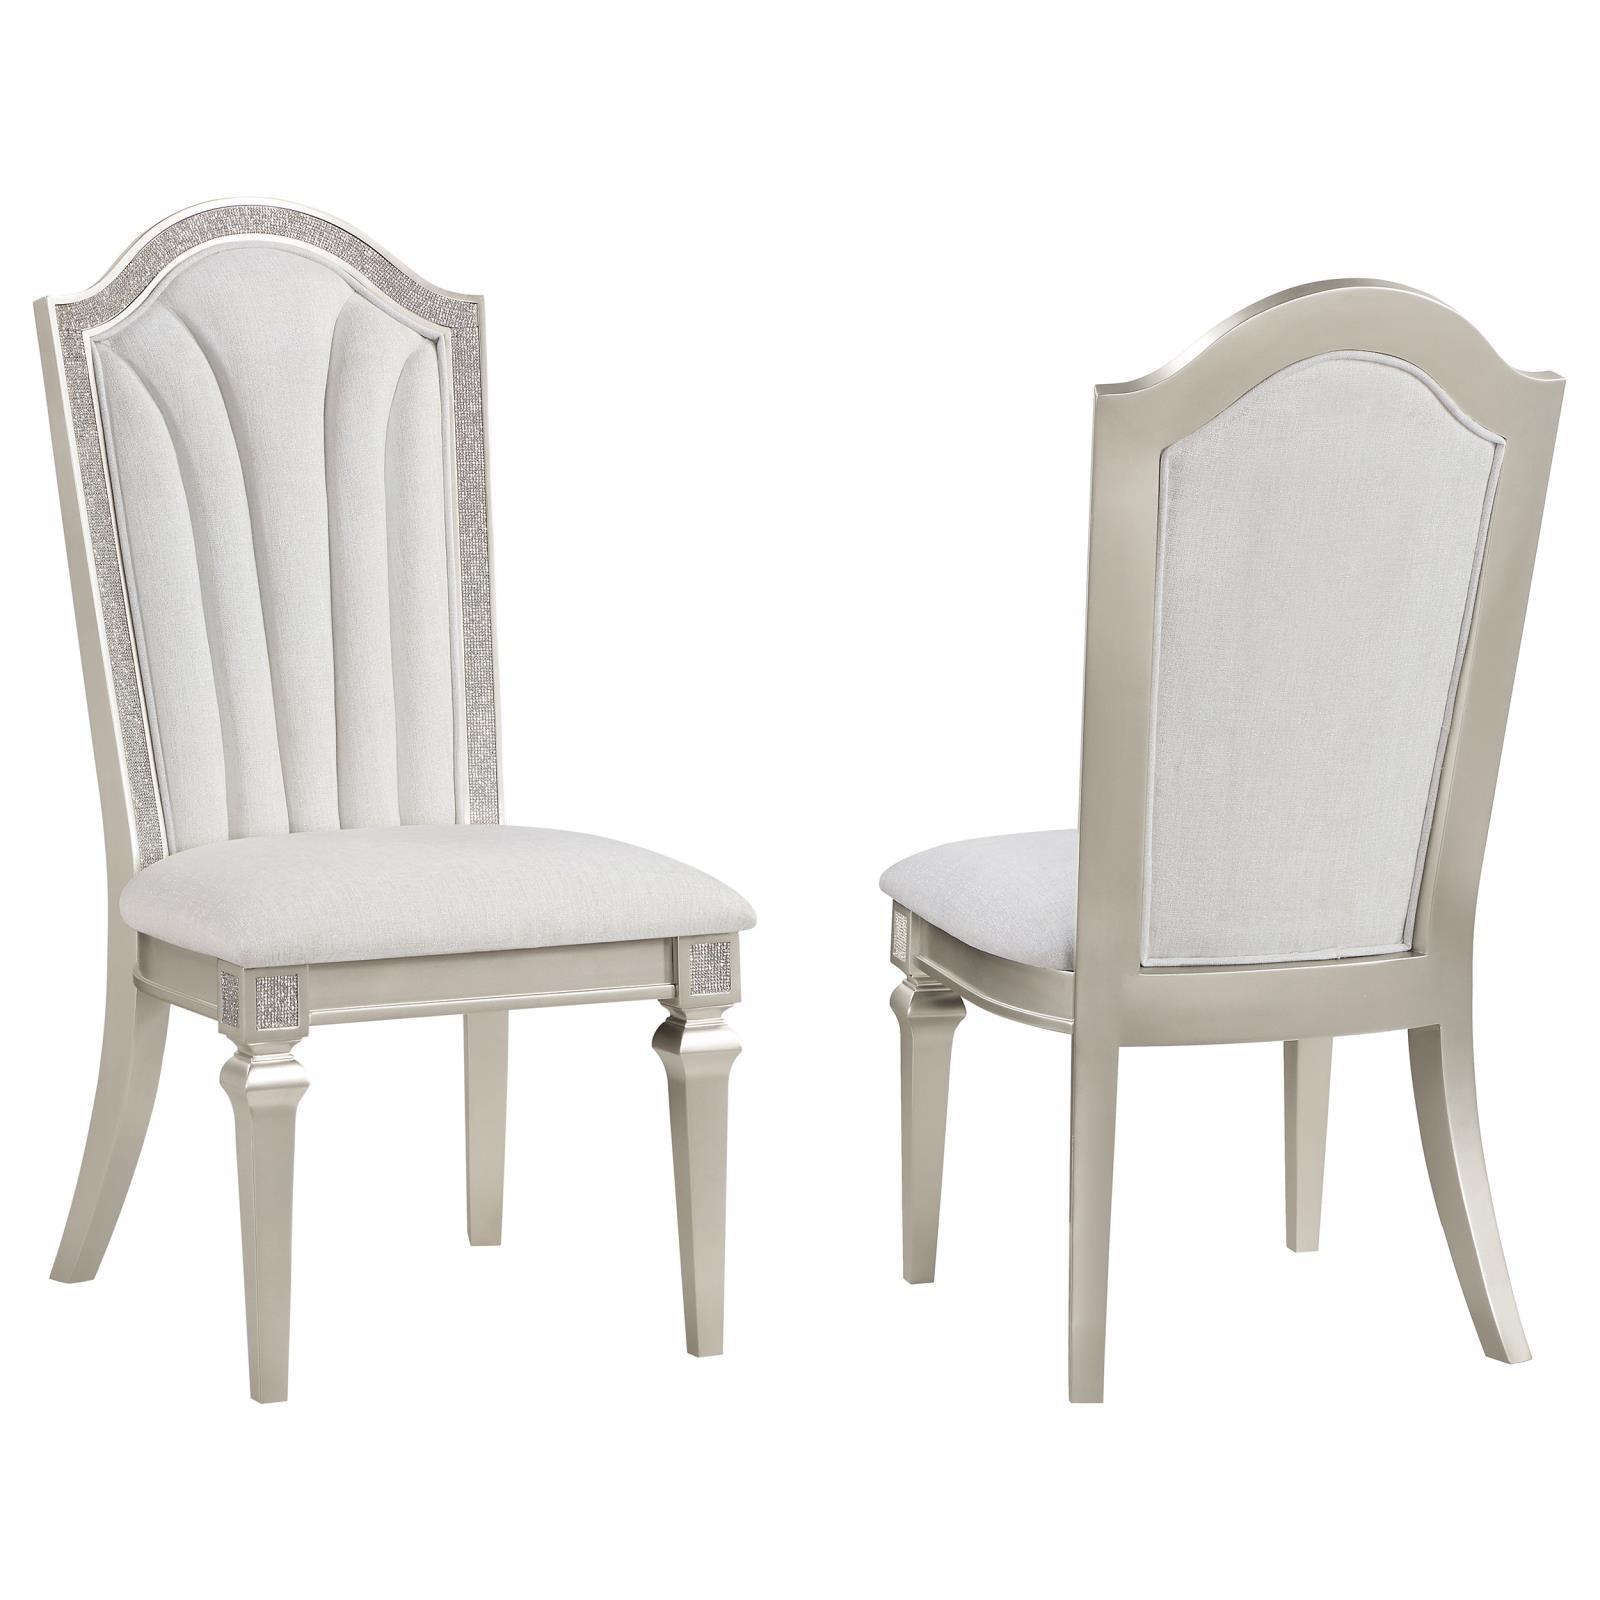 Evangeline Evangeline Upholstered Dining Side Chair With Faux Diamond Trim Ivory And Silver Oak (Set Of 2) 107552